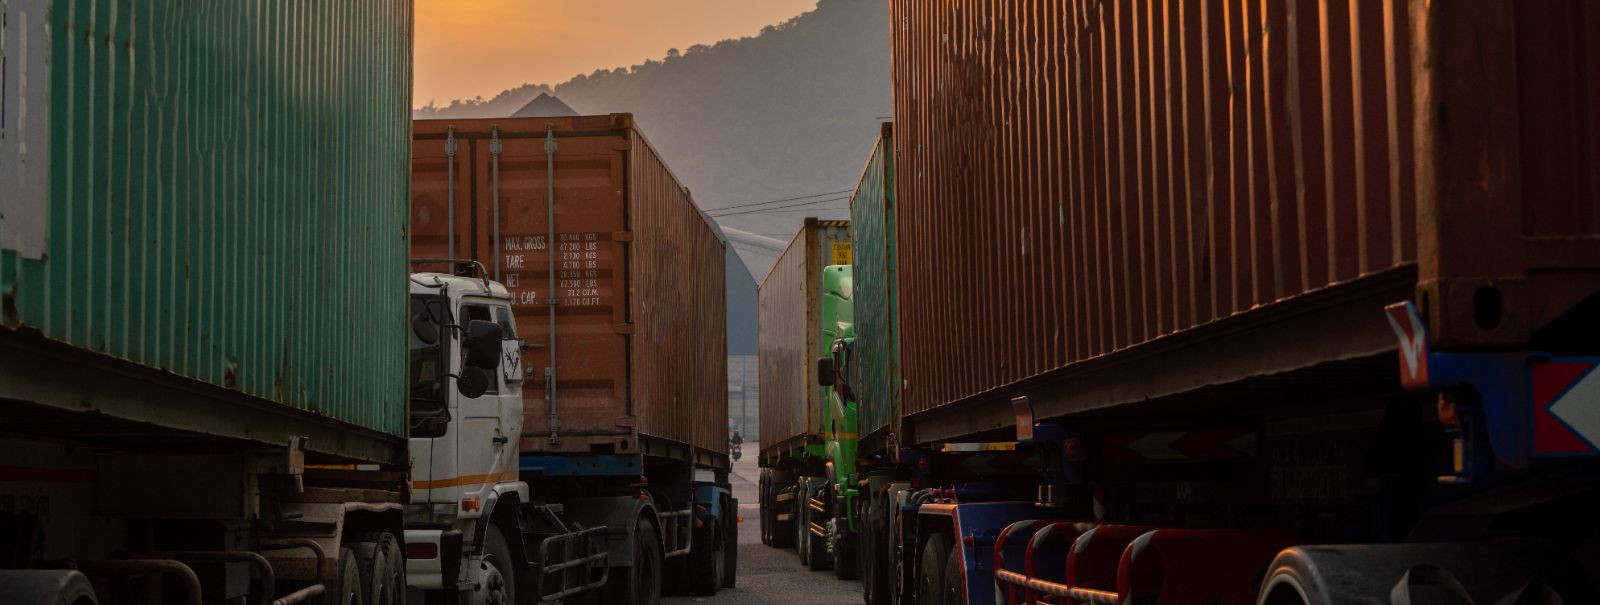 Europe's freight transport system is a complex network that powers the economy, connecting businesses and consumers across the continent. With its diverse geogr